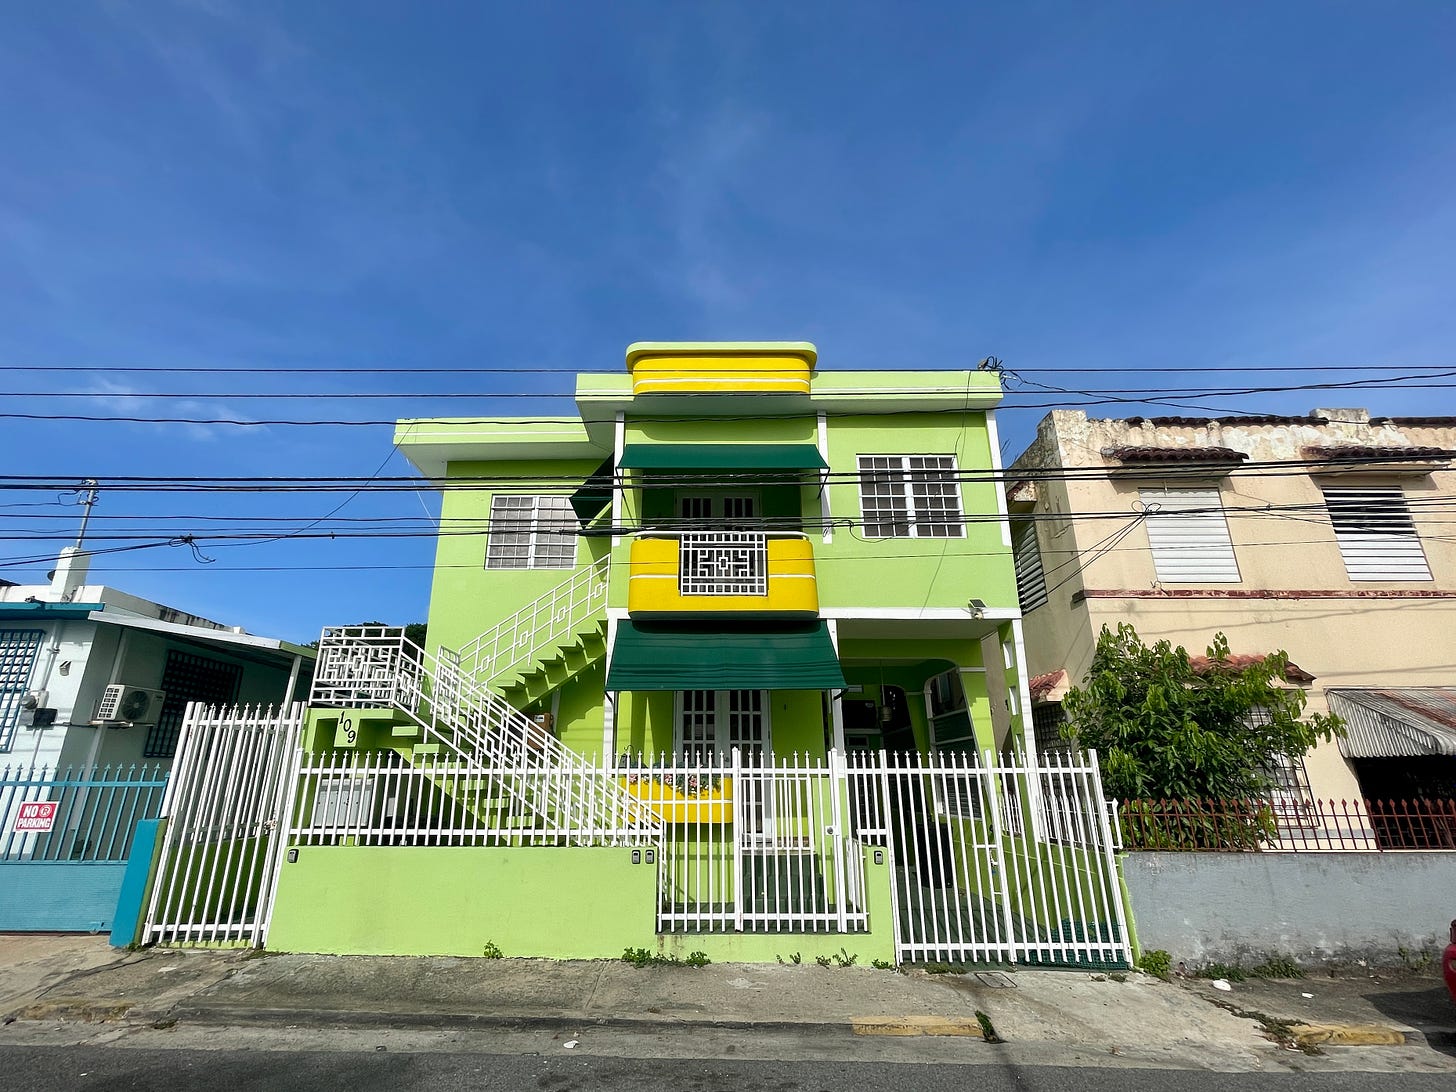 A colorful, lime green and yellow house in San Juan, blue sky in the background.